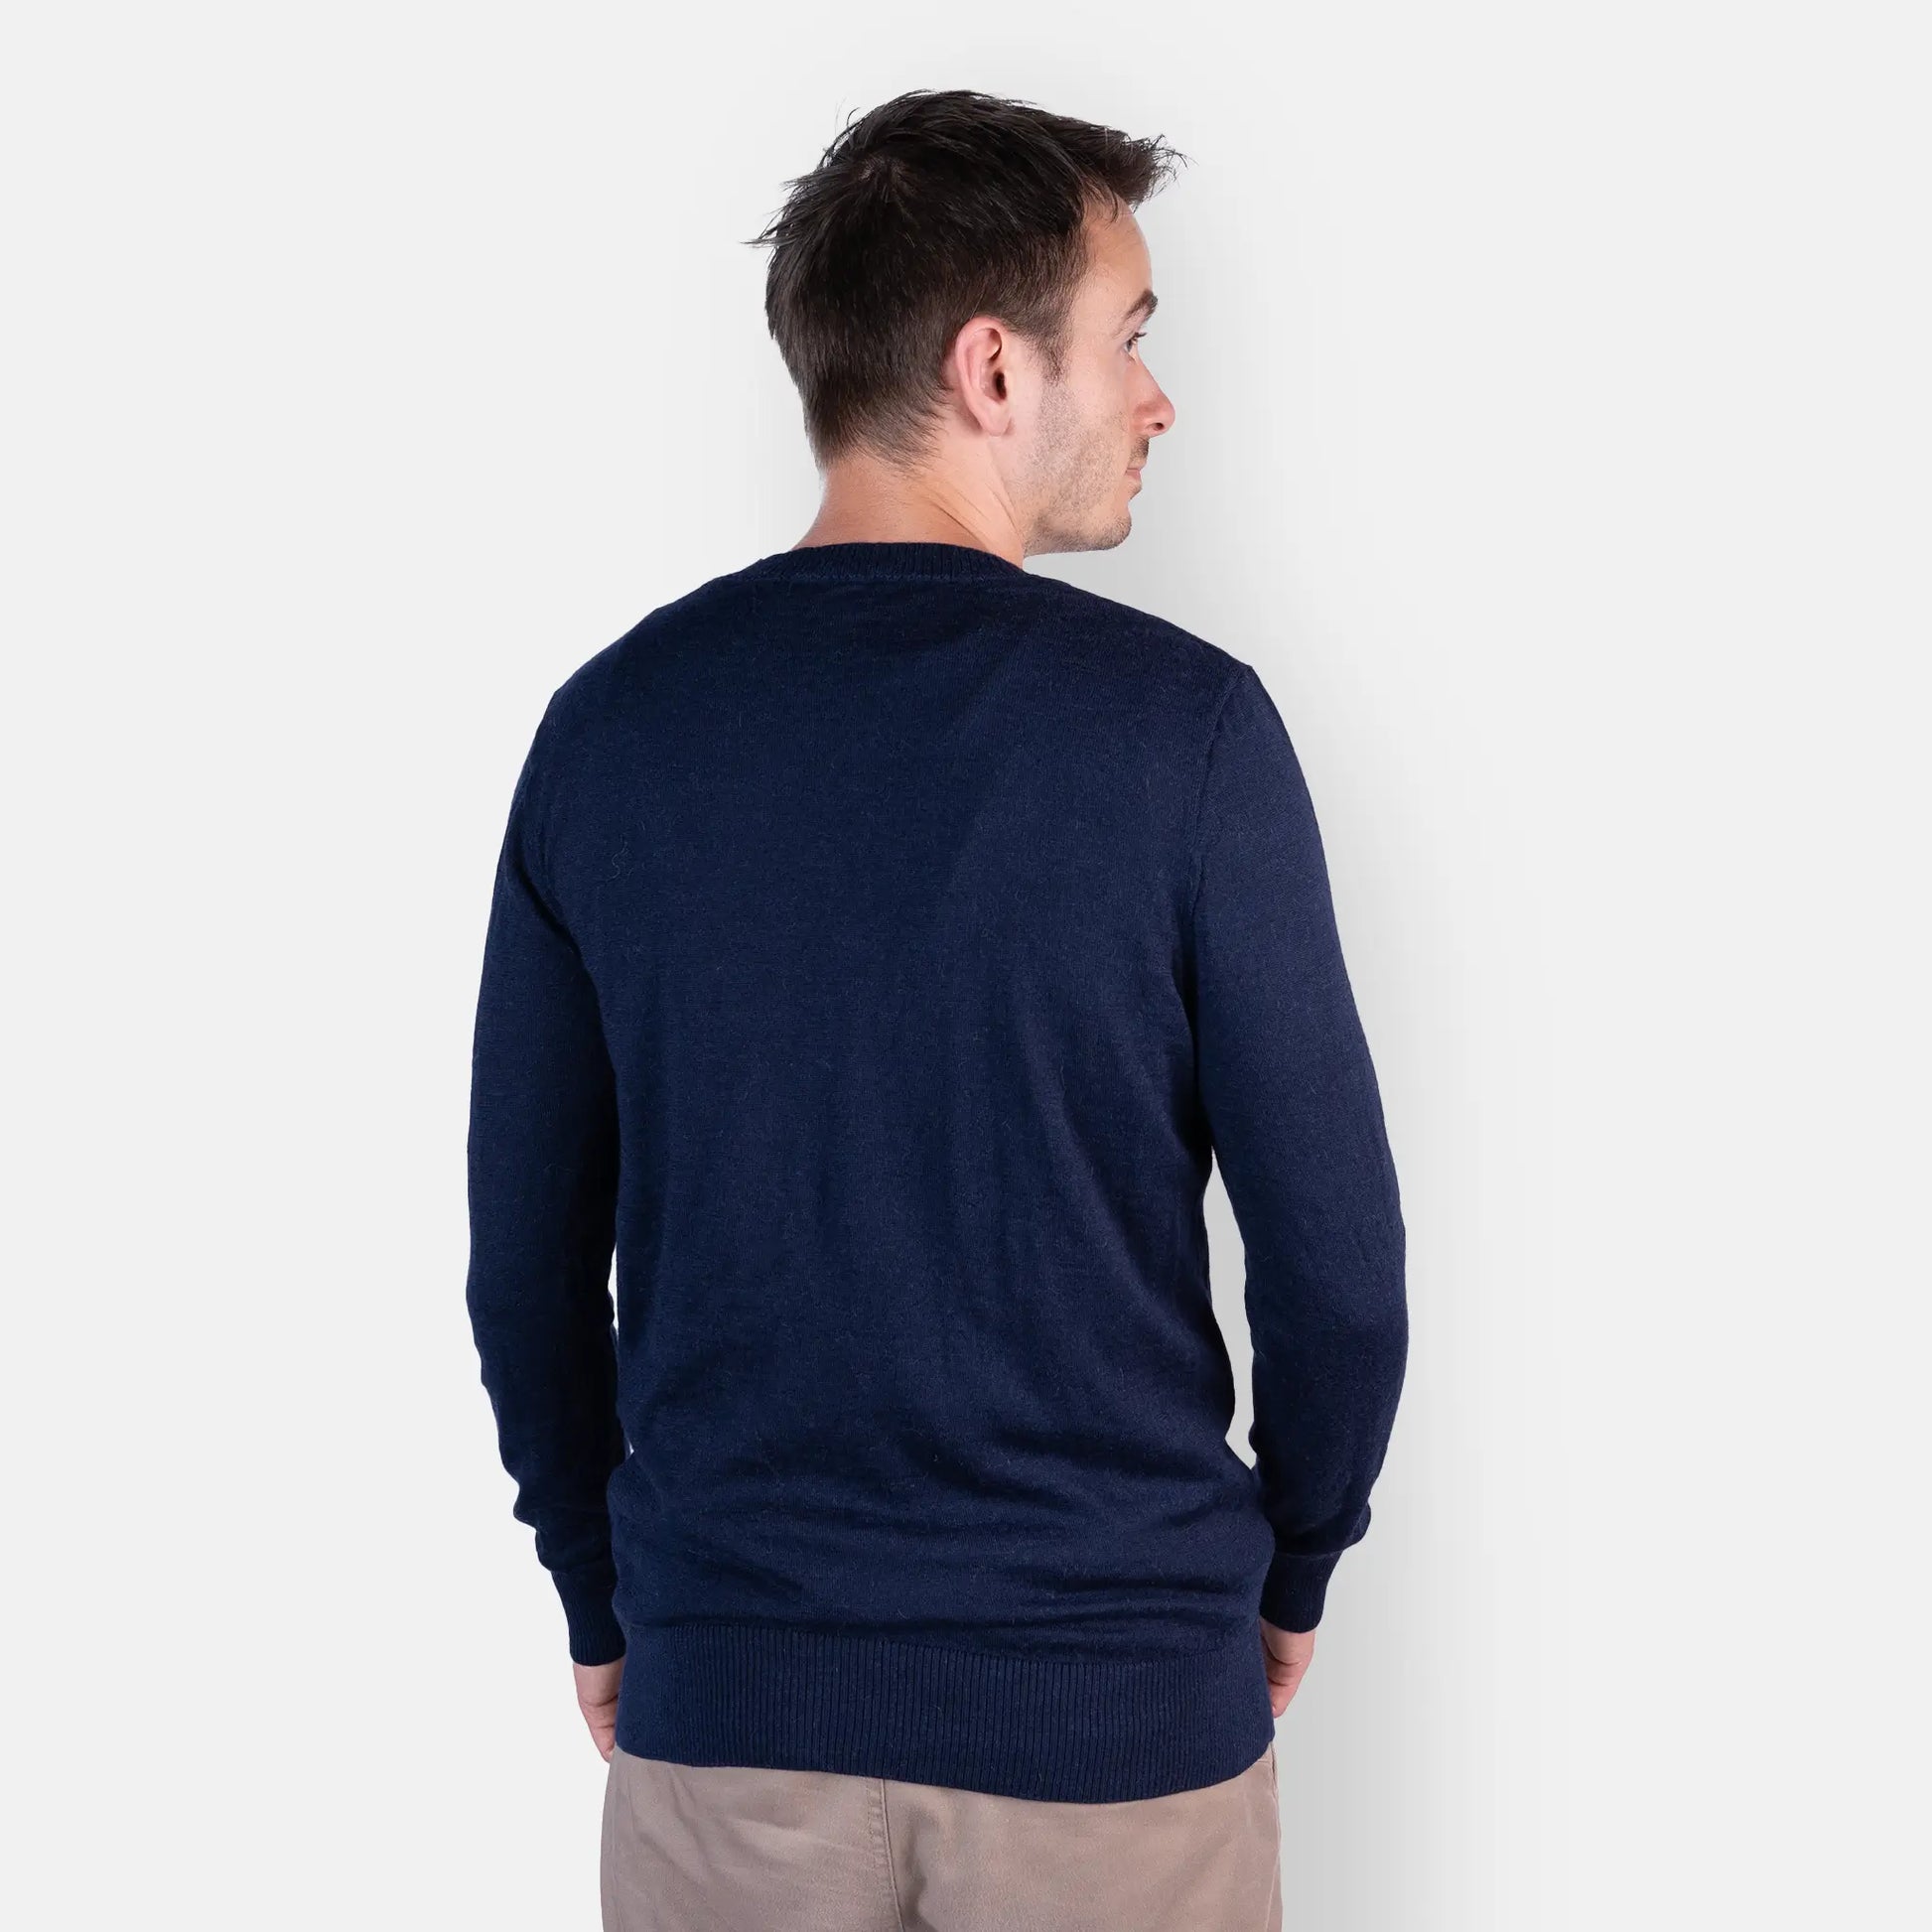 mens alpaca wool sweater most comfortable color navy blue